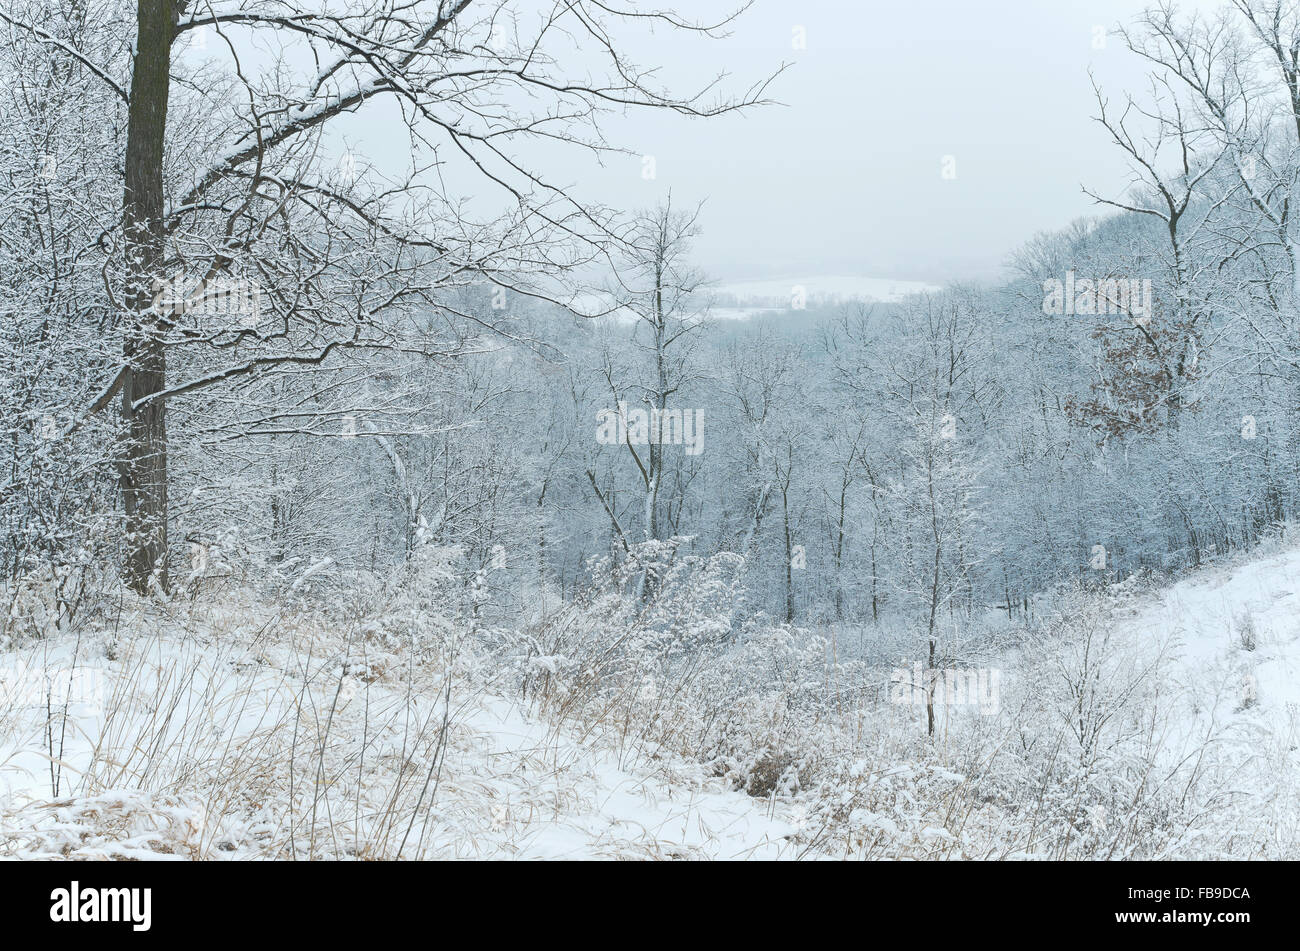 forest and ravine of winter landscape at pine bend bluffs scientific and natural area overlooking mississippi river in inver gro Stock Photo